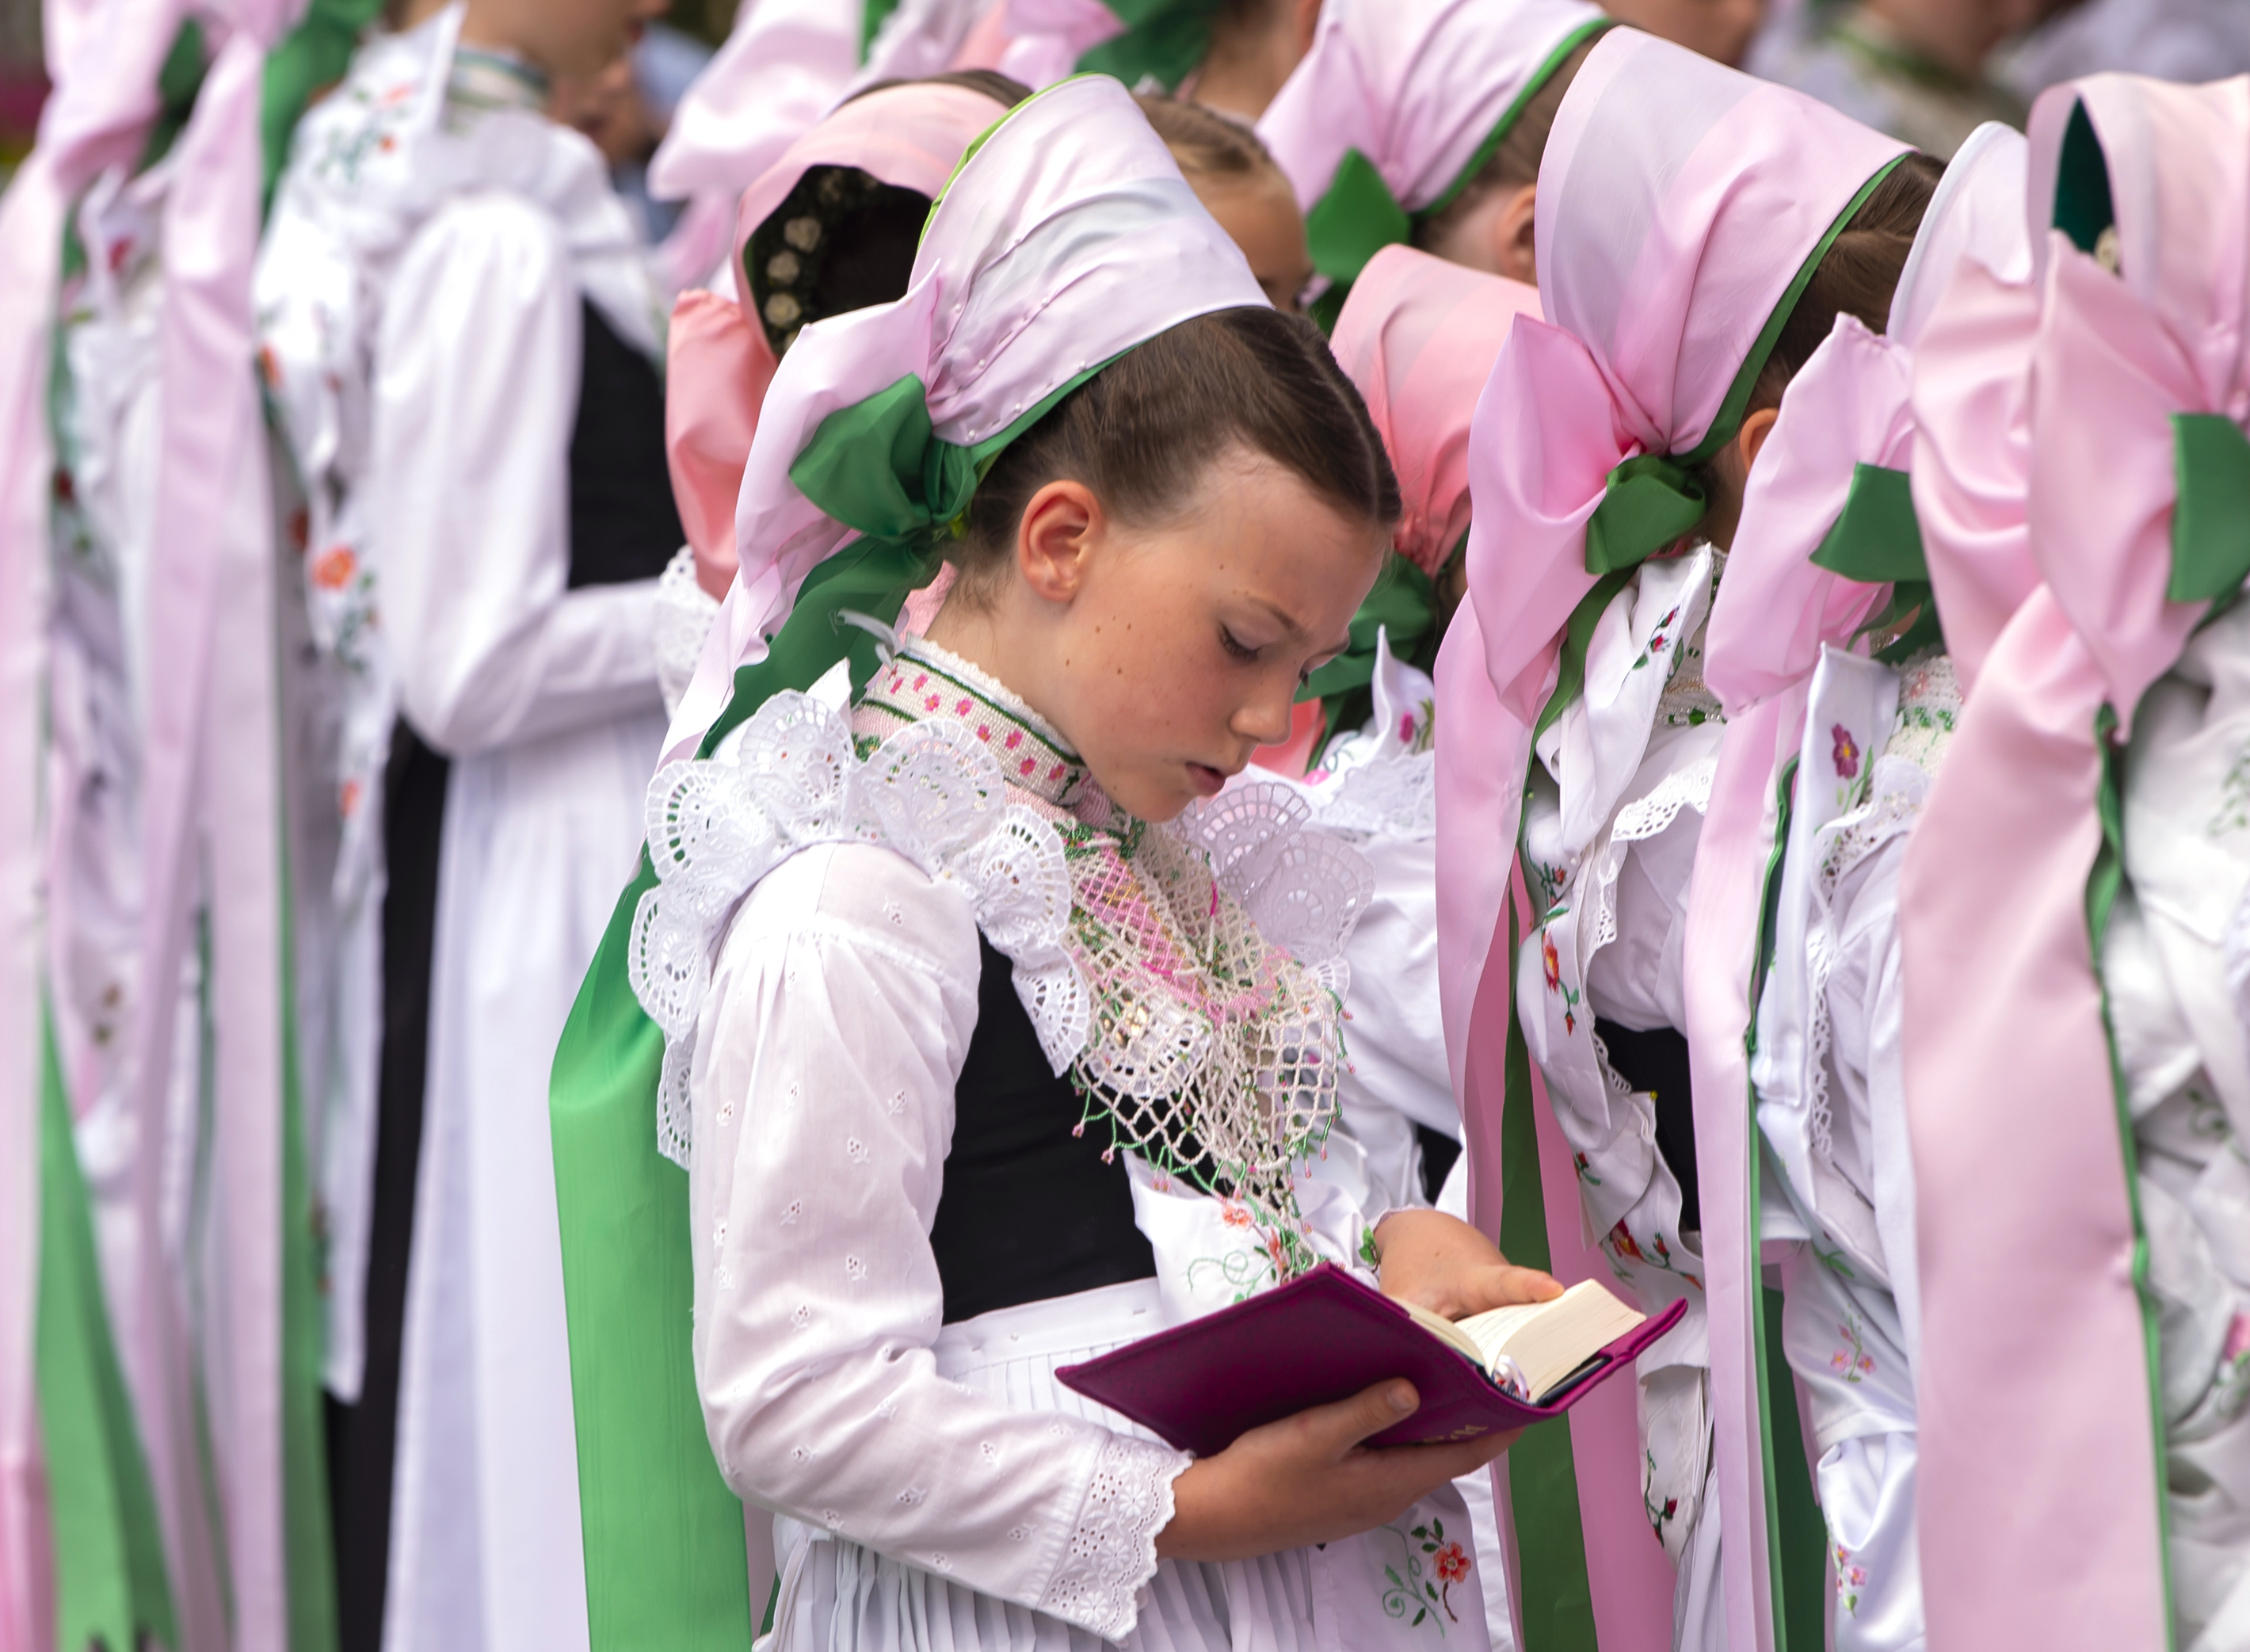 Children dressed in the traditional clothes of the Sorbs attend a Corpus Christi procession in Crostwitz, Germany, Thursday, June 20, 2019. The catholic faithful Sorbs are acknowledged as a national minority near the German-Polish border with their own language in eastern Germany. The procession to commemorate the solemnity of the body and blood of Christ has been a tradition in Lusatia (Lausitz) region. (AP Photo/Jens Meyer)